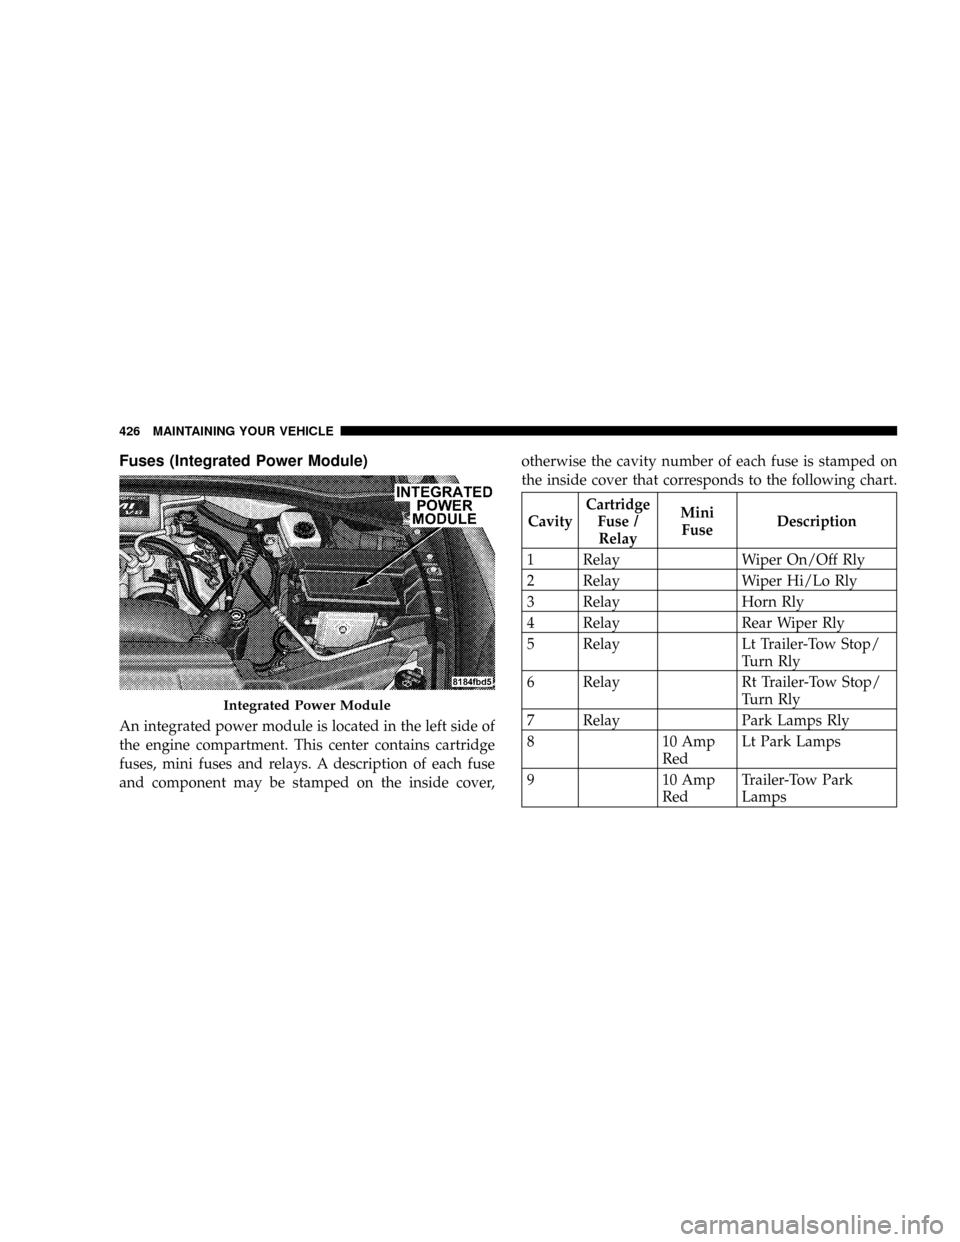 CHRYSLER ASPEN 2008 2.G User Guide Fuses (Integrated Power Module)
An integrated power module is located in the left side of
the engine compartment. This center contains cartridge
fuses, mini fuses and relays. A description of each fus